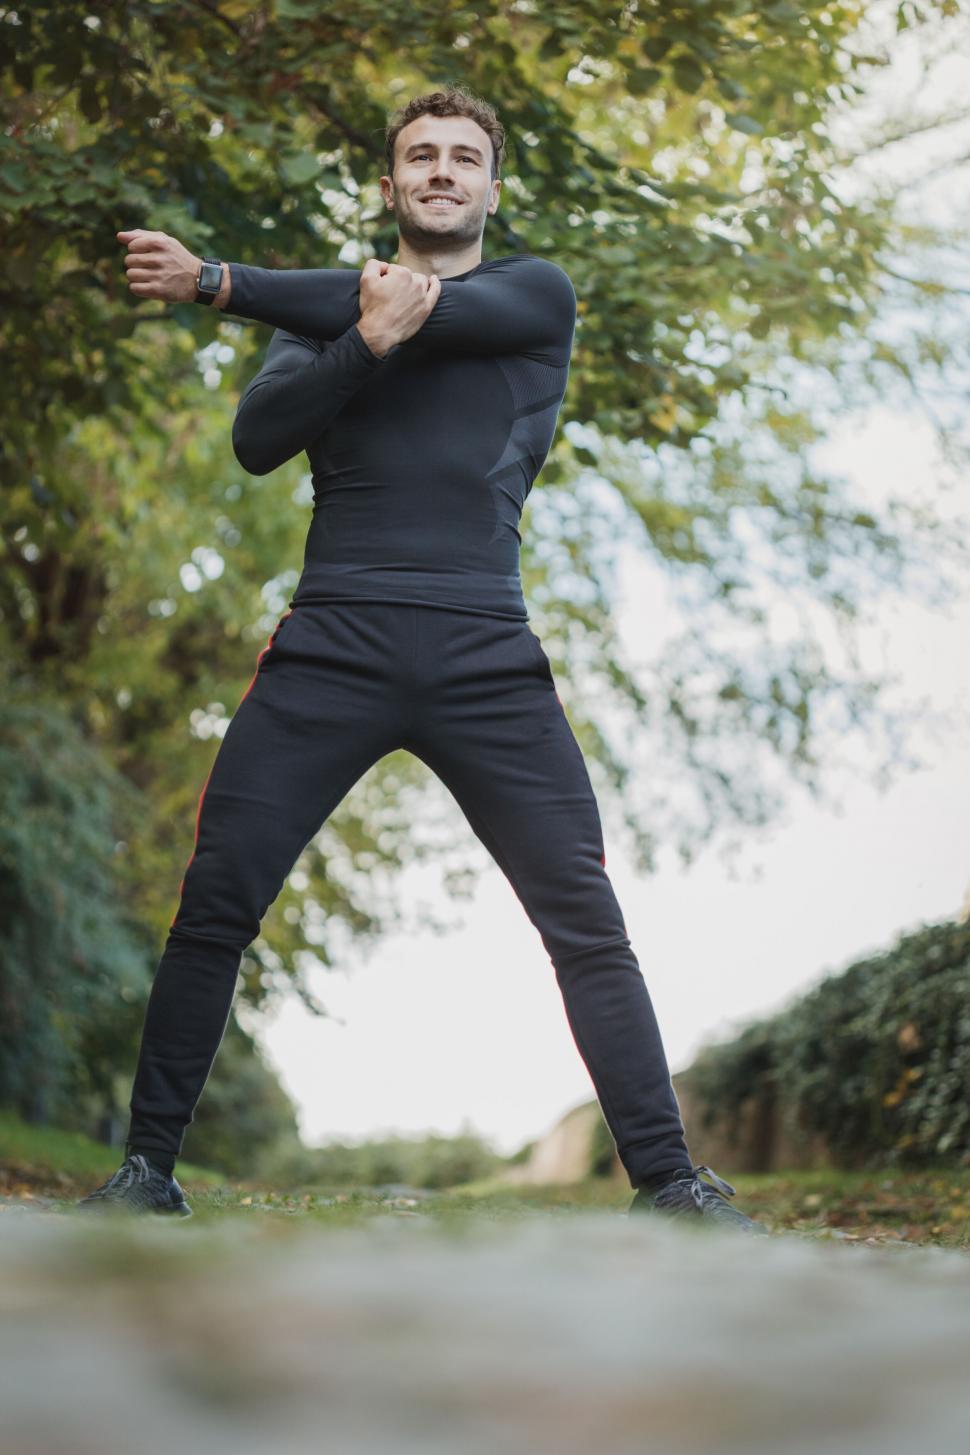 Free Image of Man stretching during outdoor exercise 